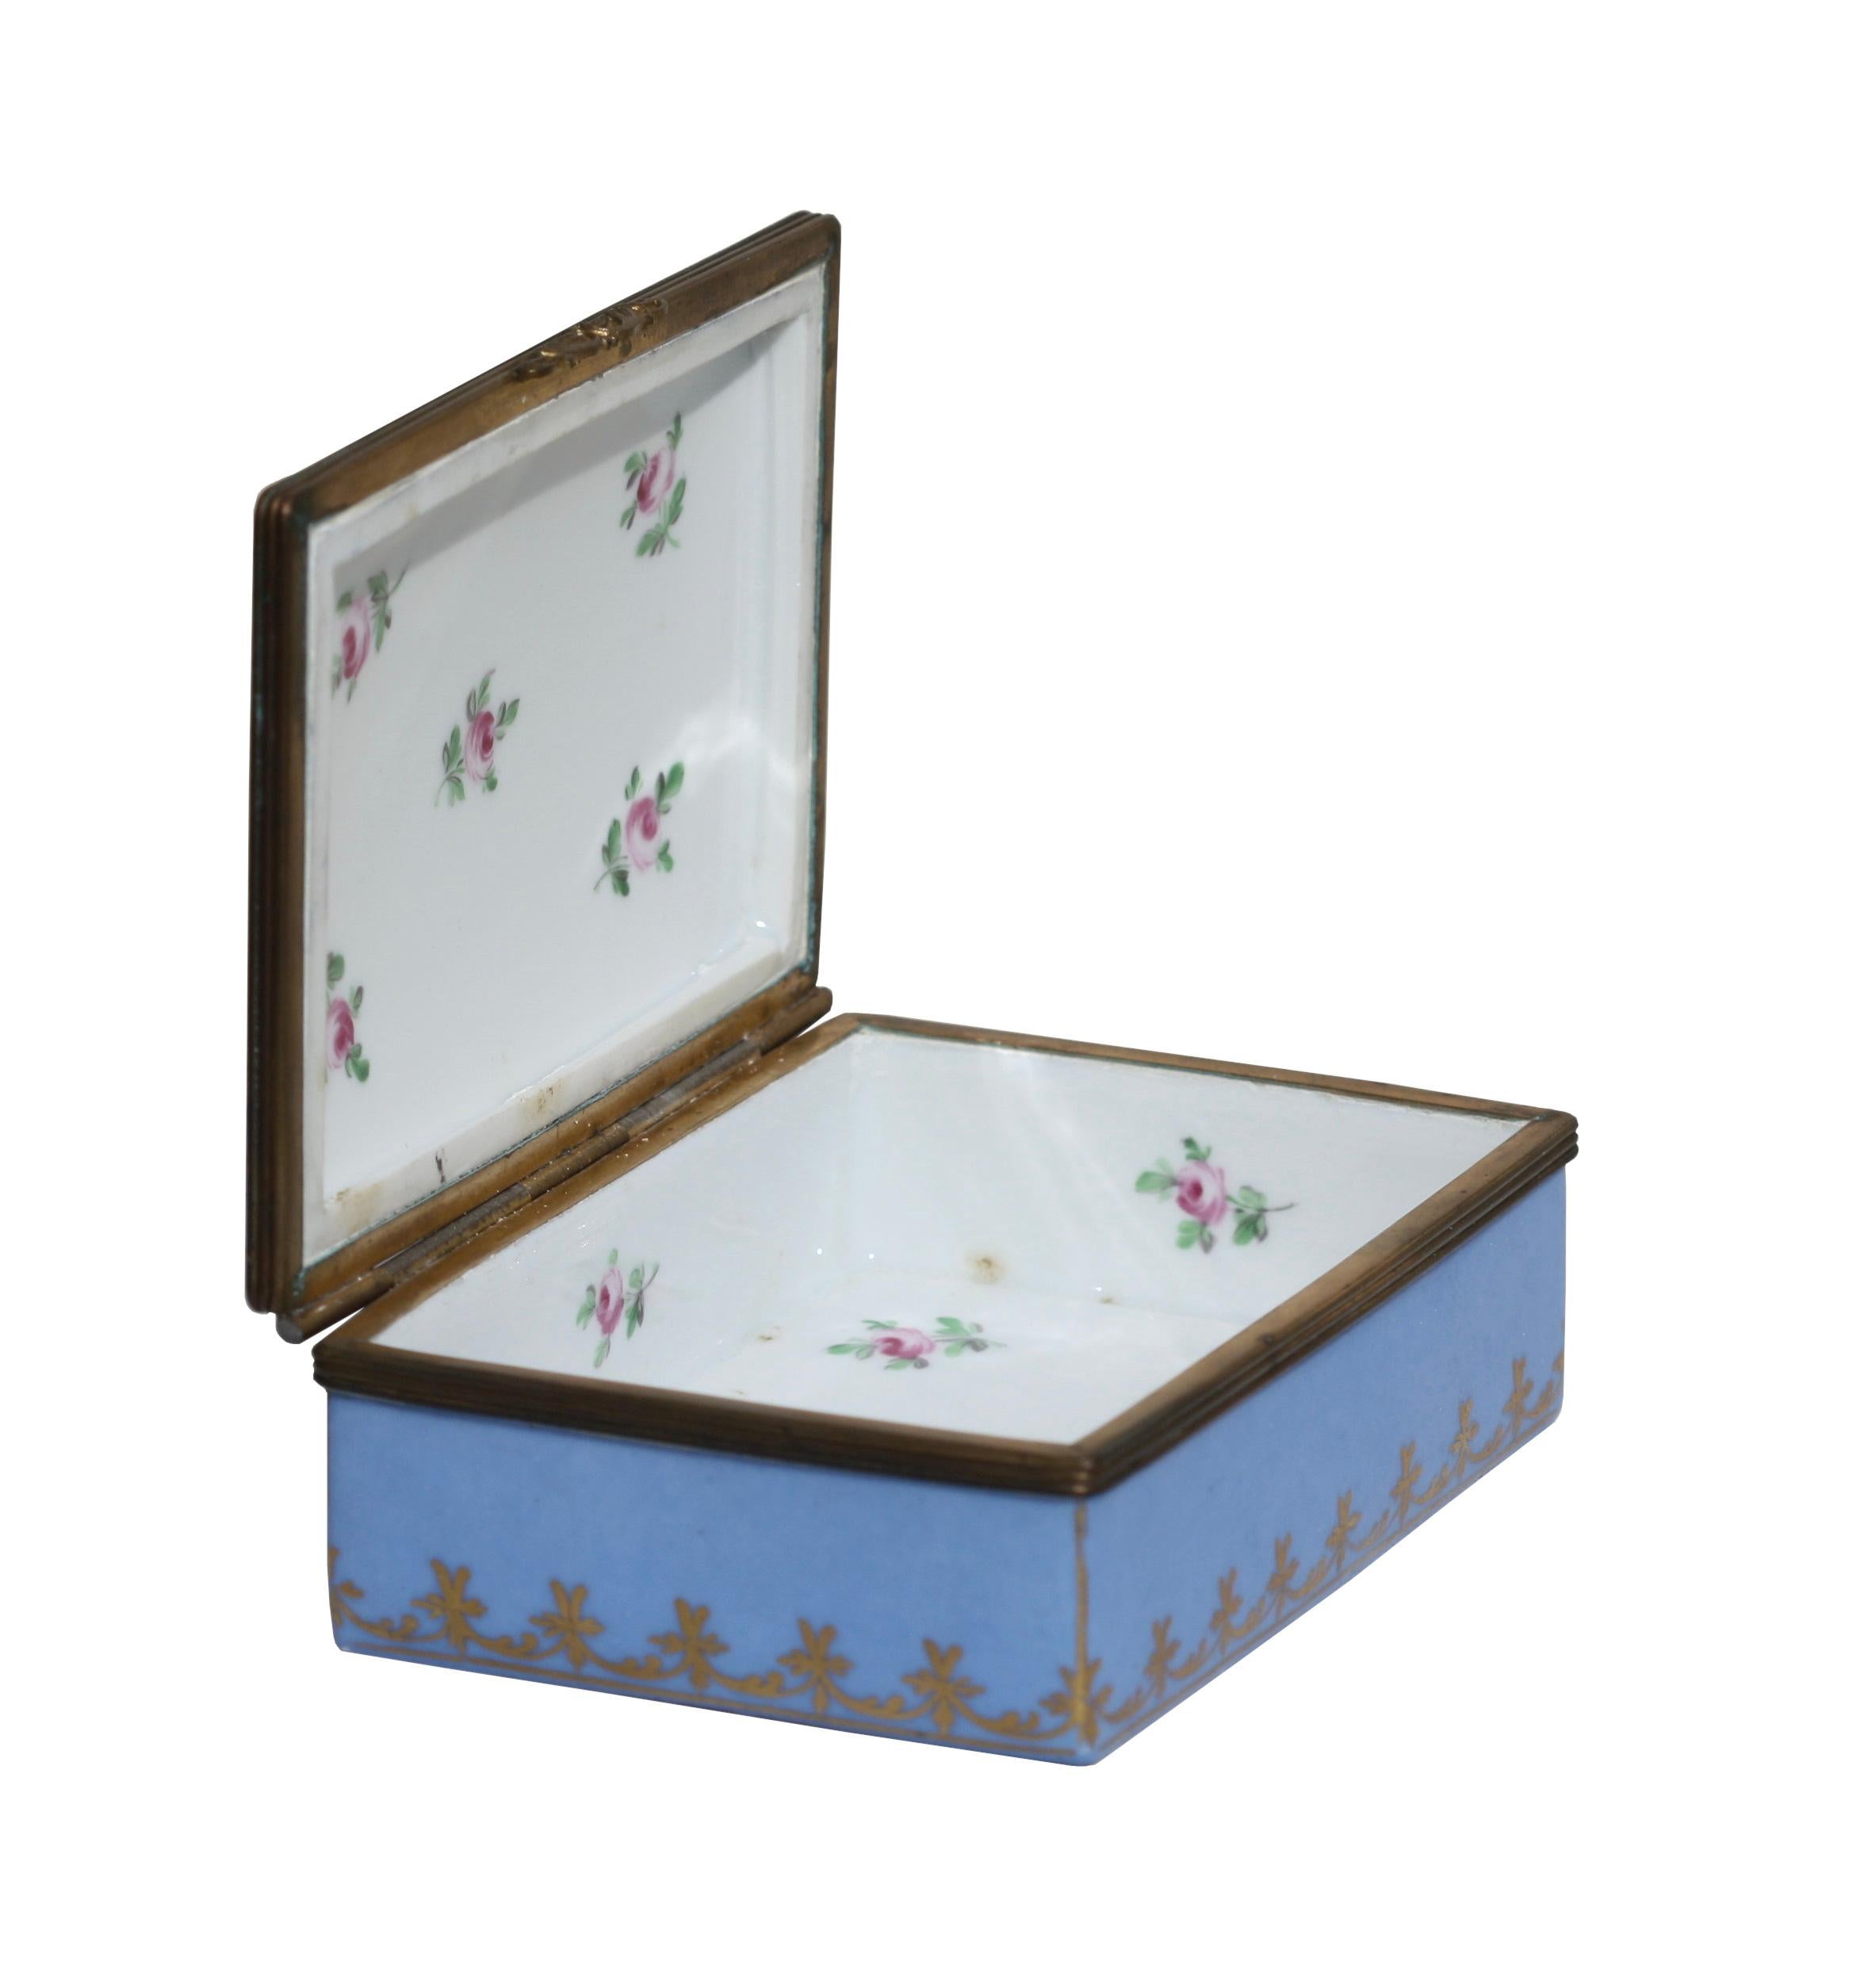 Porcelain box, English, late 19th century
The rectangular hinged cover painted with a figural panel and inscribed 